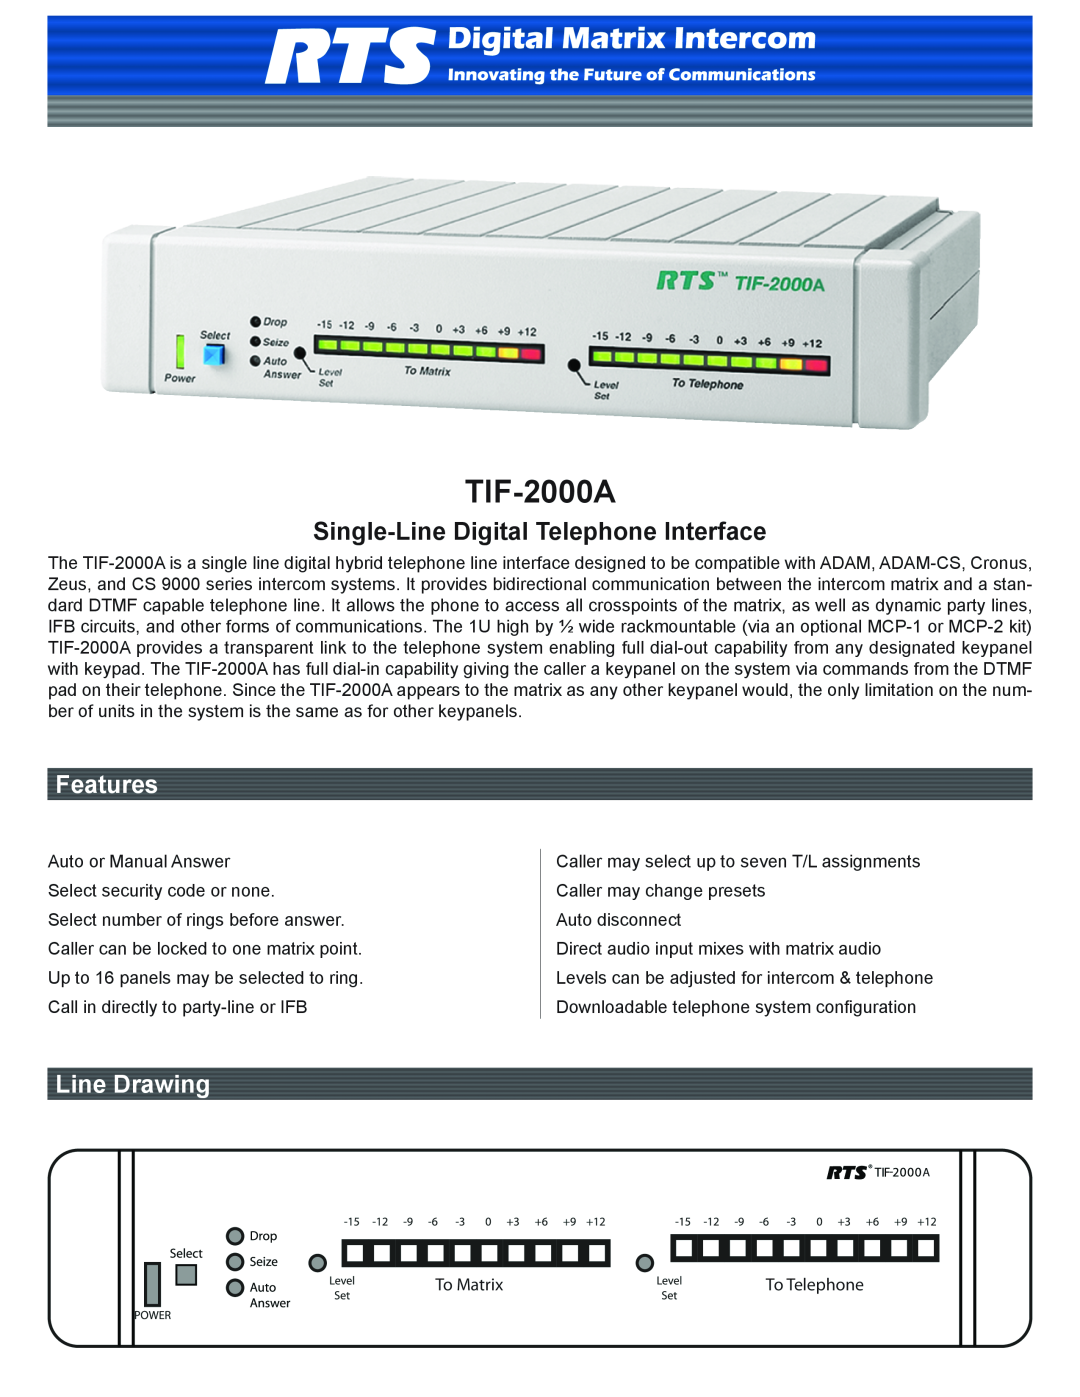 RTS TIF-2000A manual Single-Line Digital Telephone Interface, Features, Line Drawing 